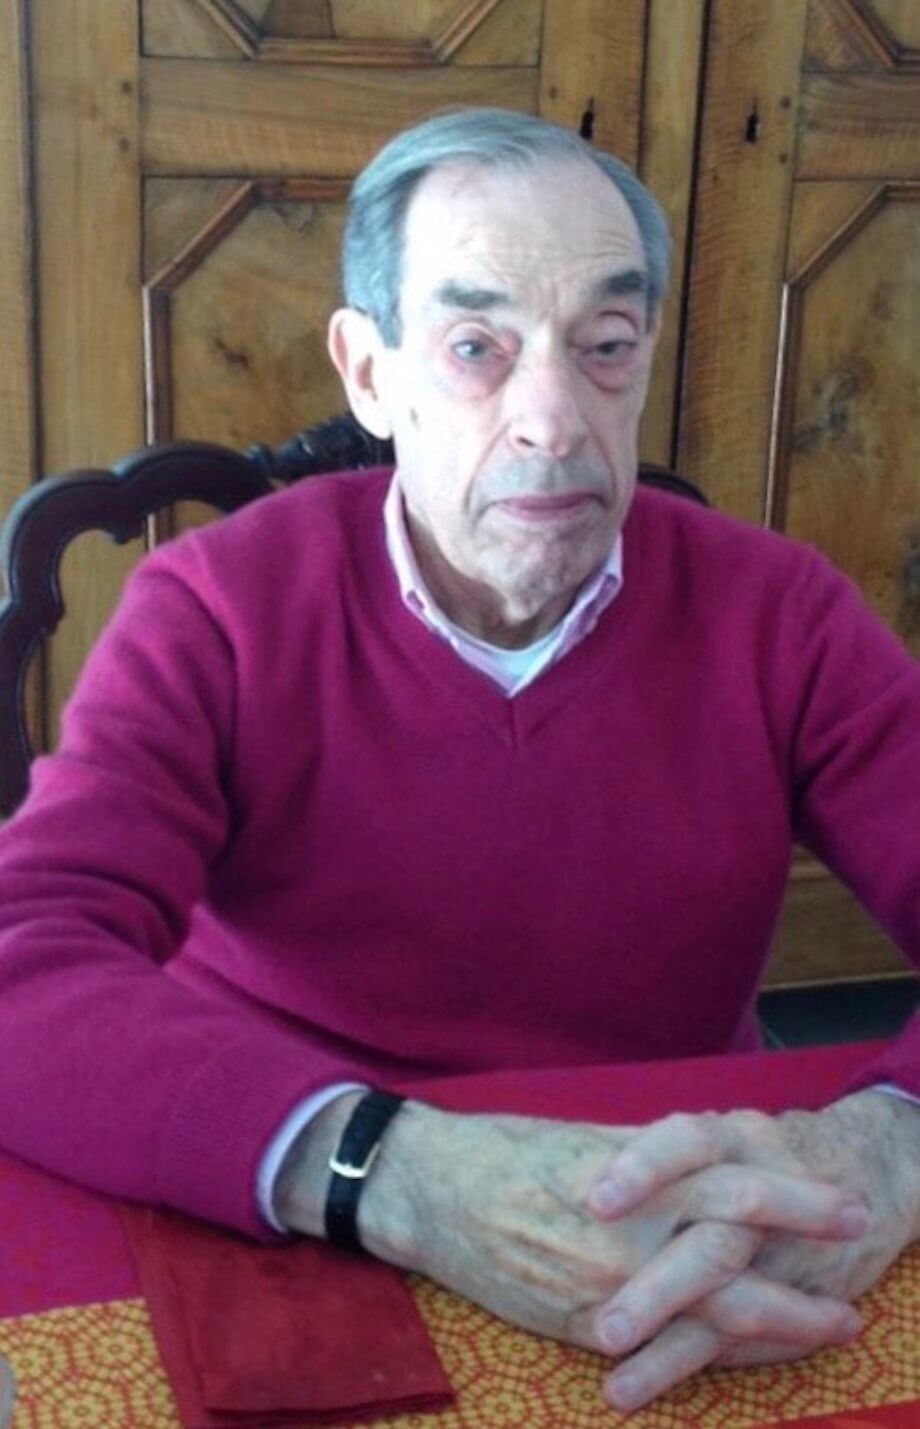 An elderly man in a purple jumper sitting at a dining table